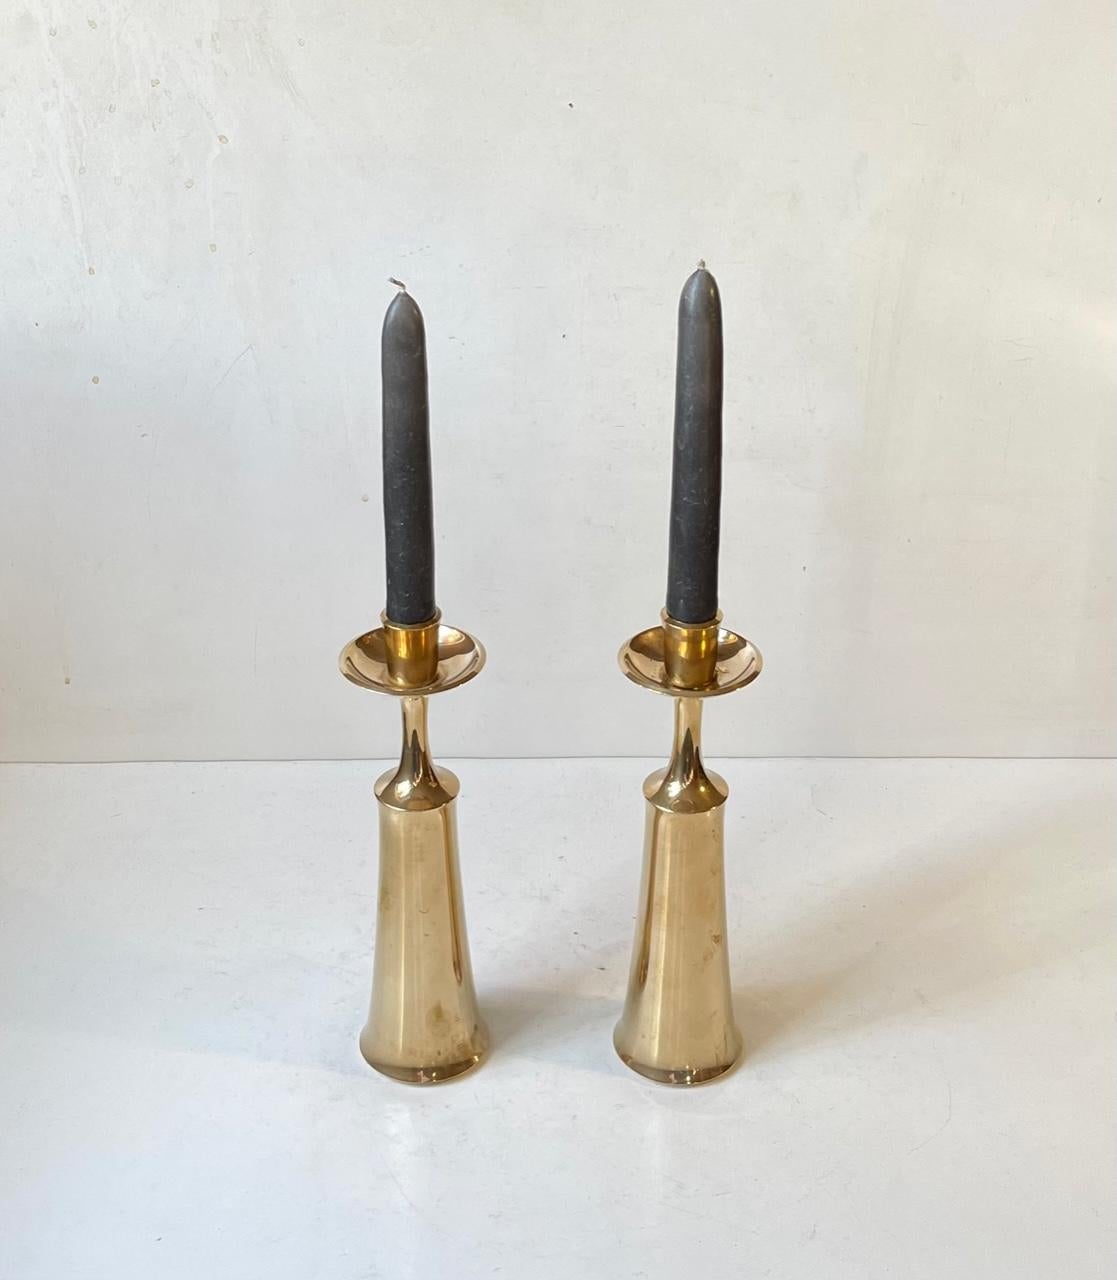 A pair of large candlesticks in engine turned solid brass. Designed in the late 1950s by Danish Industrial design icon Jens Harald Quistgaard (IHQ). They are to be used with regular sized candles. Both fully imprinted and signed beneath their base.